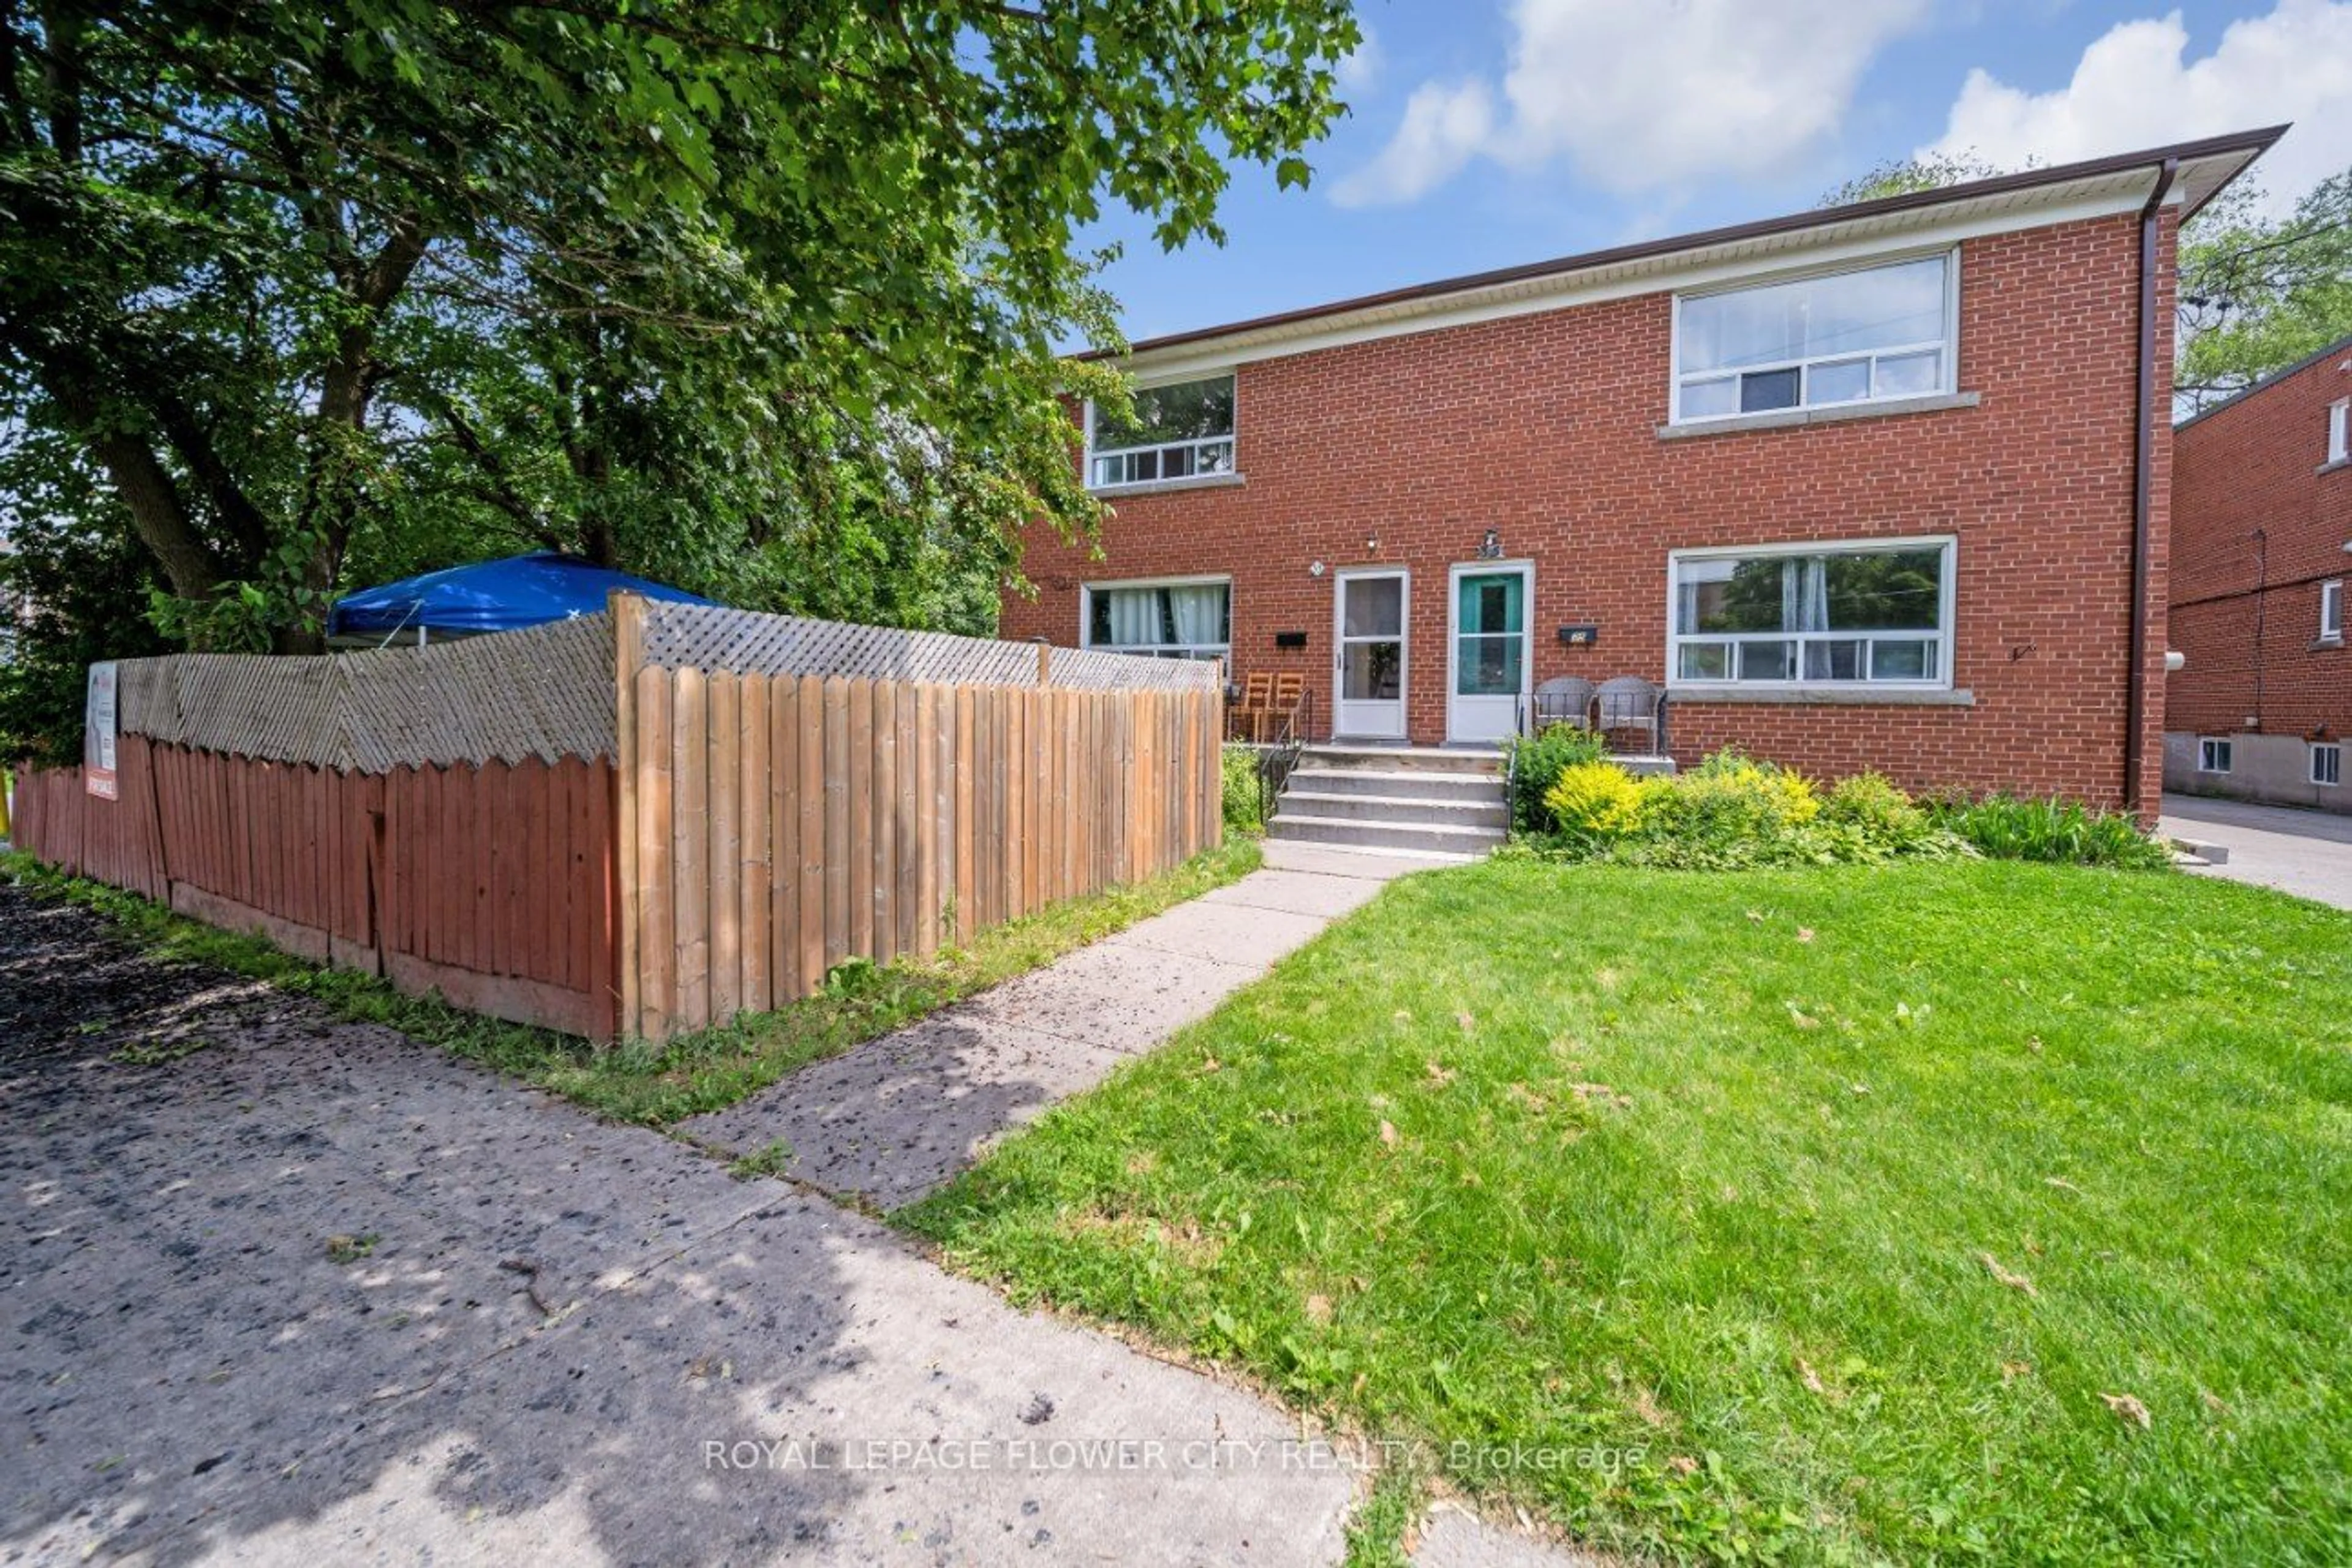 Home with brick exterior material for 33 Morgan Ave, Toronto Ontario M8Y 2Z9